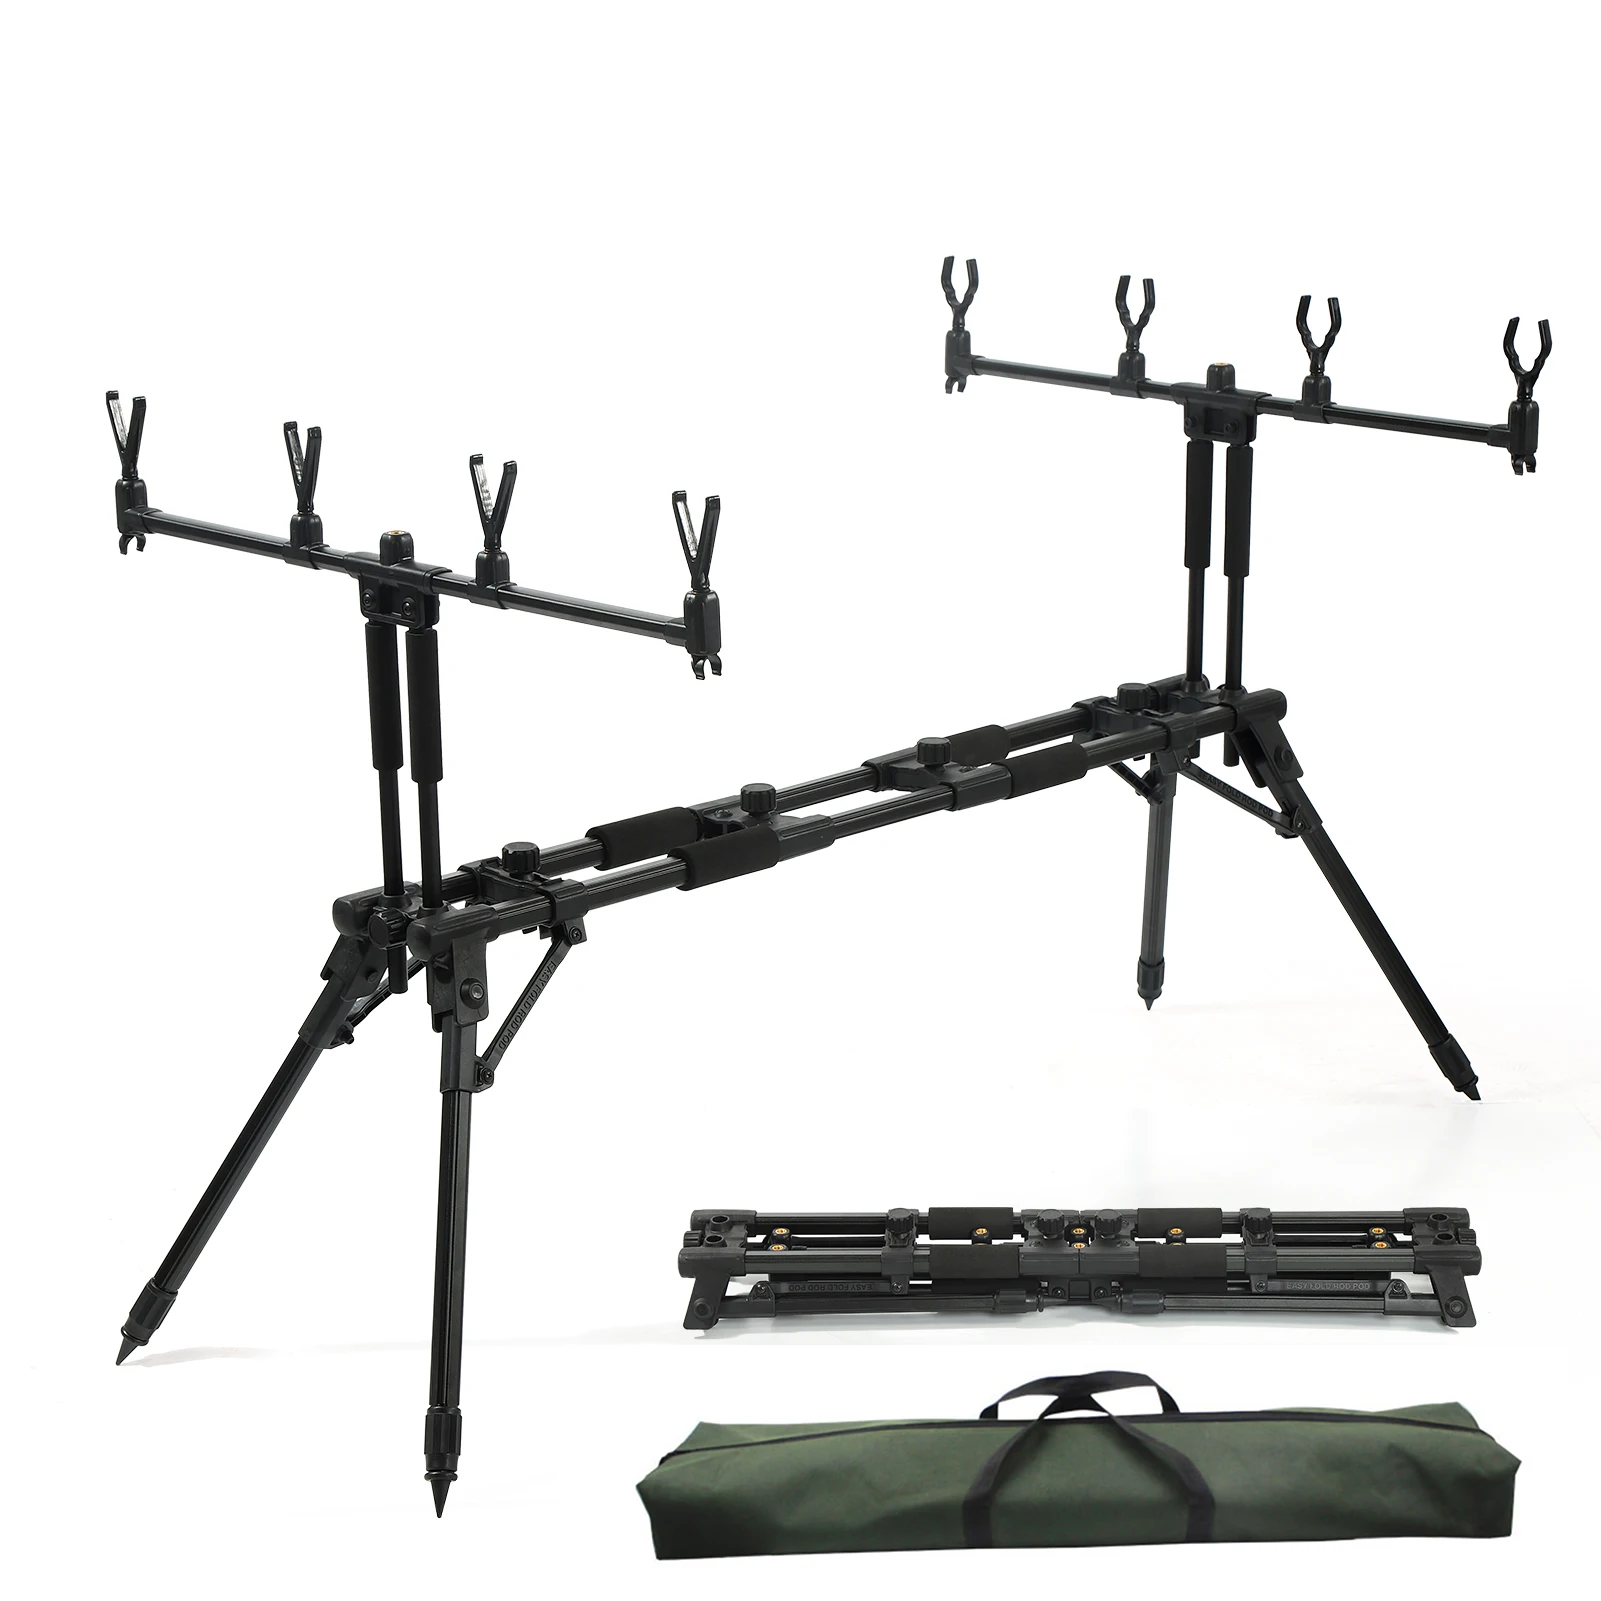 

RP181 Adjustable Retractable Carp Fishing Rod Pod Stand Holder Foldable Fishing Pole Pod Stand with Carry Case Fishing Accessory